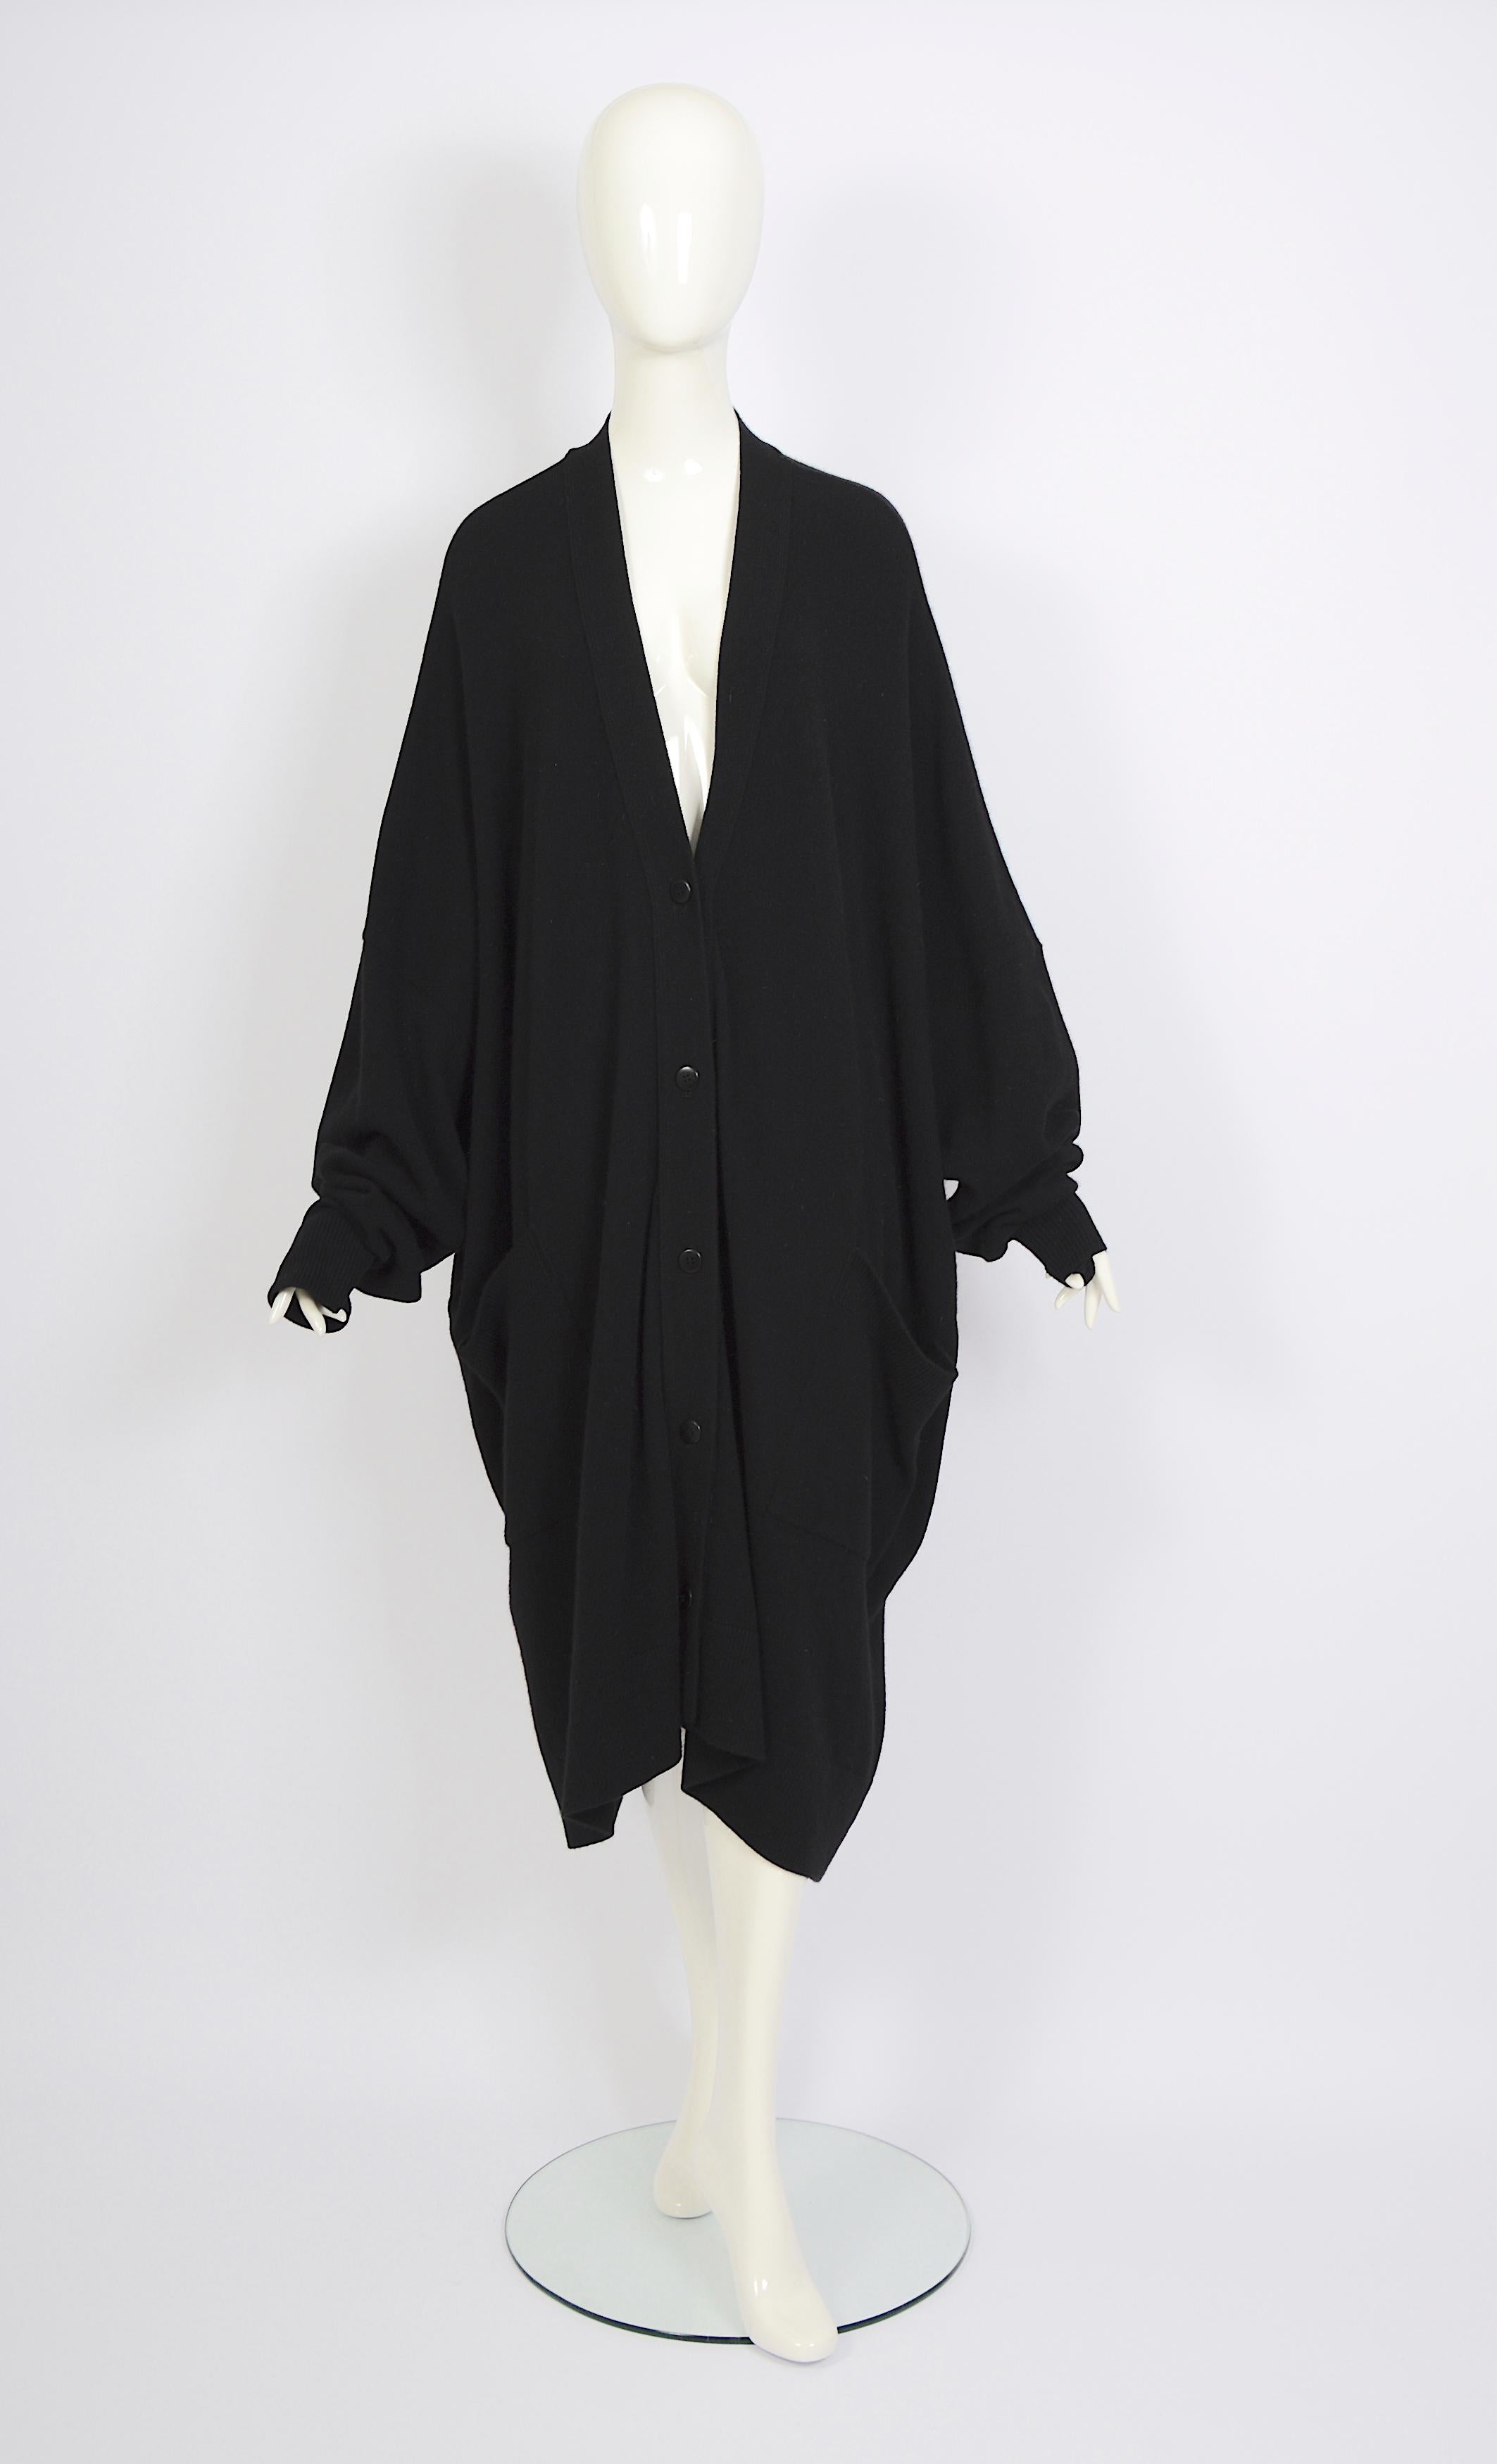 We are delighted to present this stunning vintage circa 1970s Issey Miyake cocoon cardigan it is oversized/huge with a plunging neckline, dolman sleeves, pockets, and a single button closure at the front.
This Issey Miyake piece is stunning. It